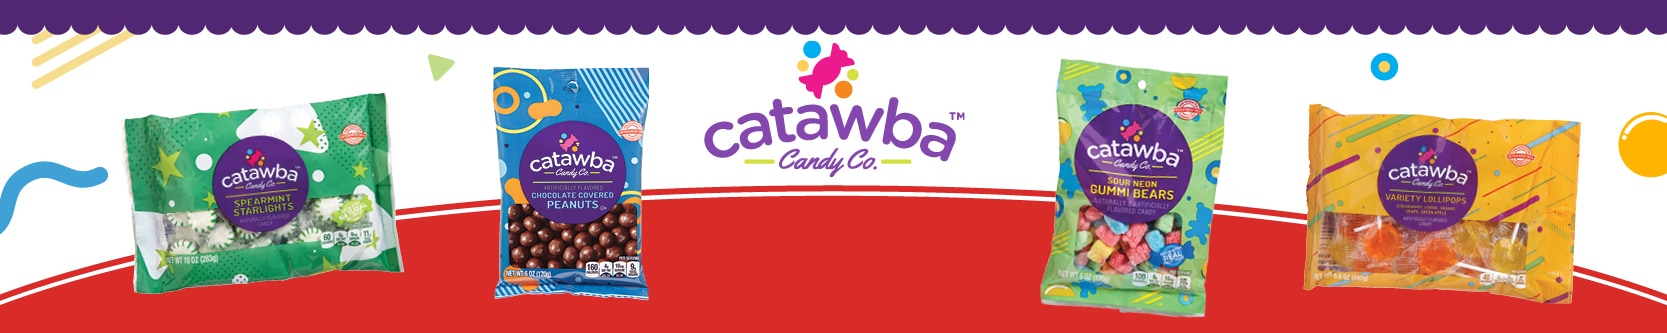 Download Catawba Candy Co Save On Sweet Treats Family Dollar